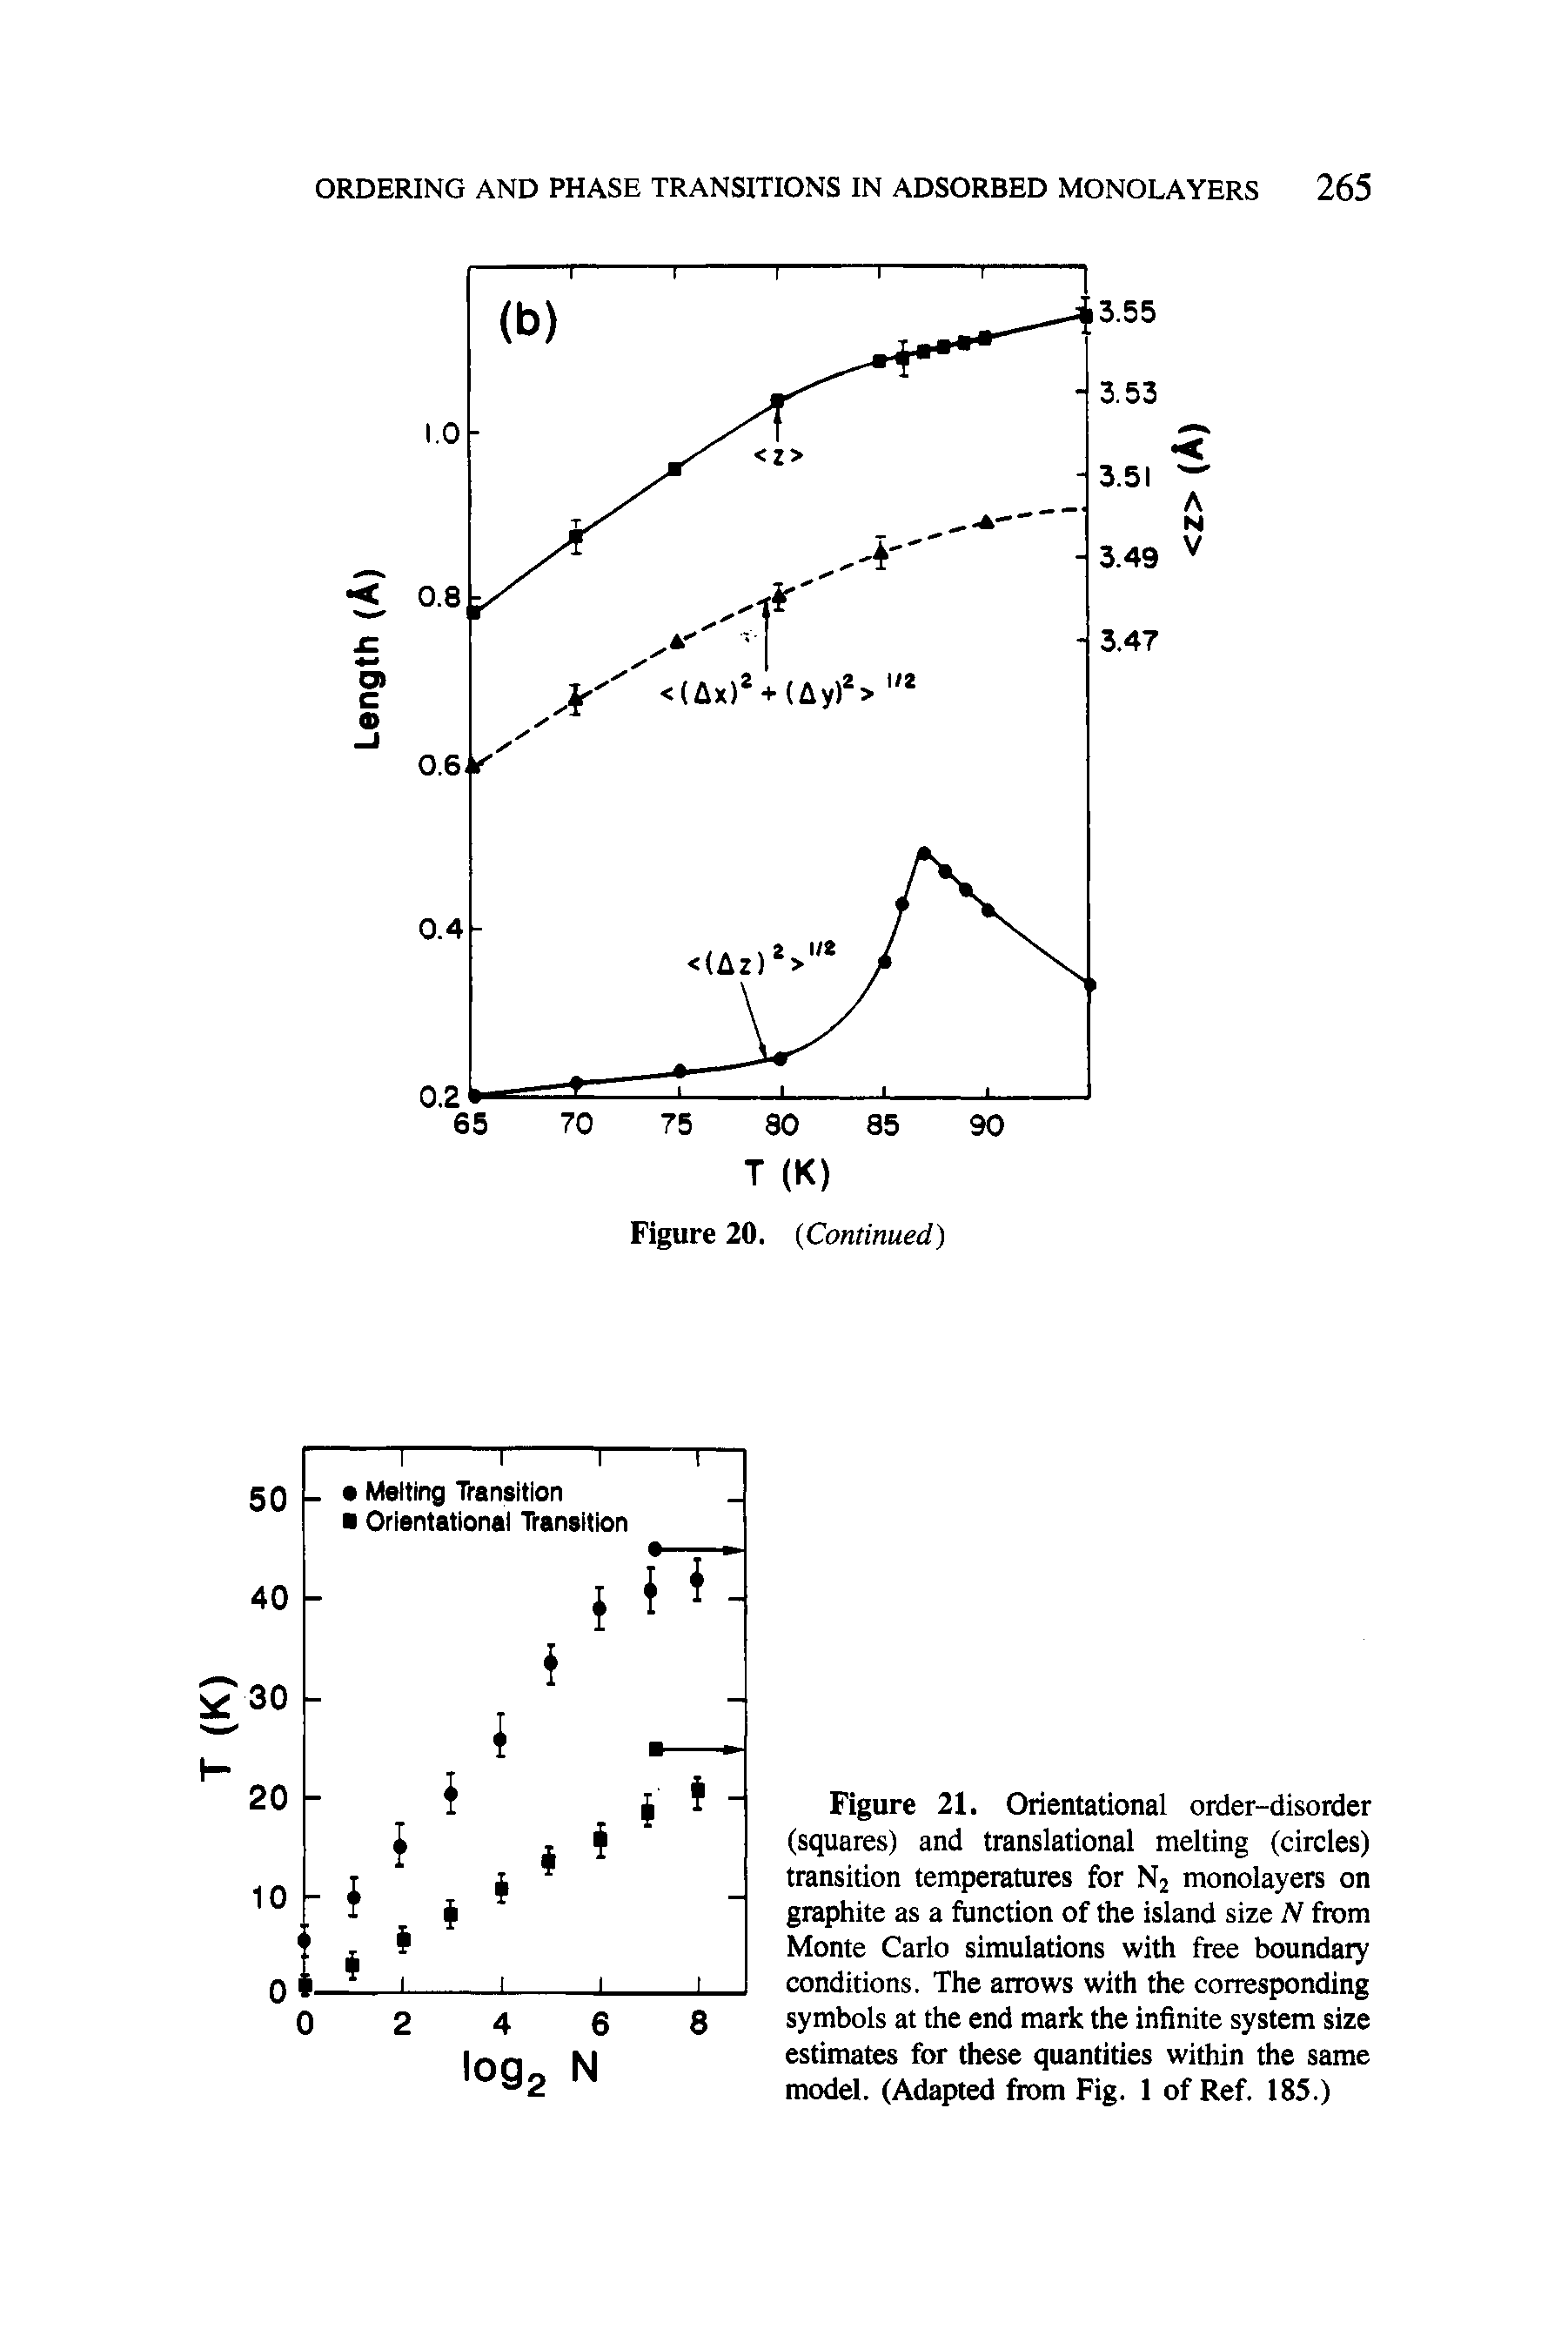 Figure 21. Orientational order-disorder (squares) and translational melting (circles) transition temperatures for N2 monolayers on graphite as a function of the island size N from Monte Carlo simulations with free boundary conditions. The arrows with the corresponding symbols at the end mark the infinite system size estimates for these quantities within the same model. (Adapted from Fig. 1 of Ref. 185.)...